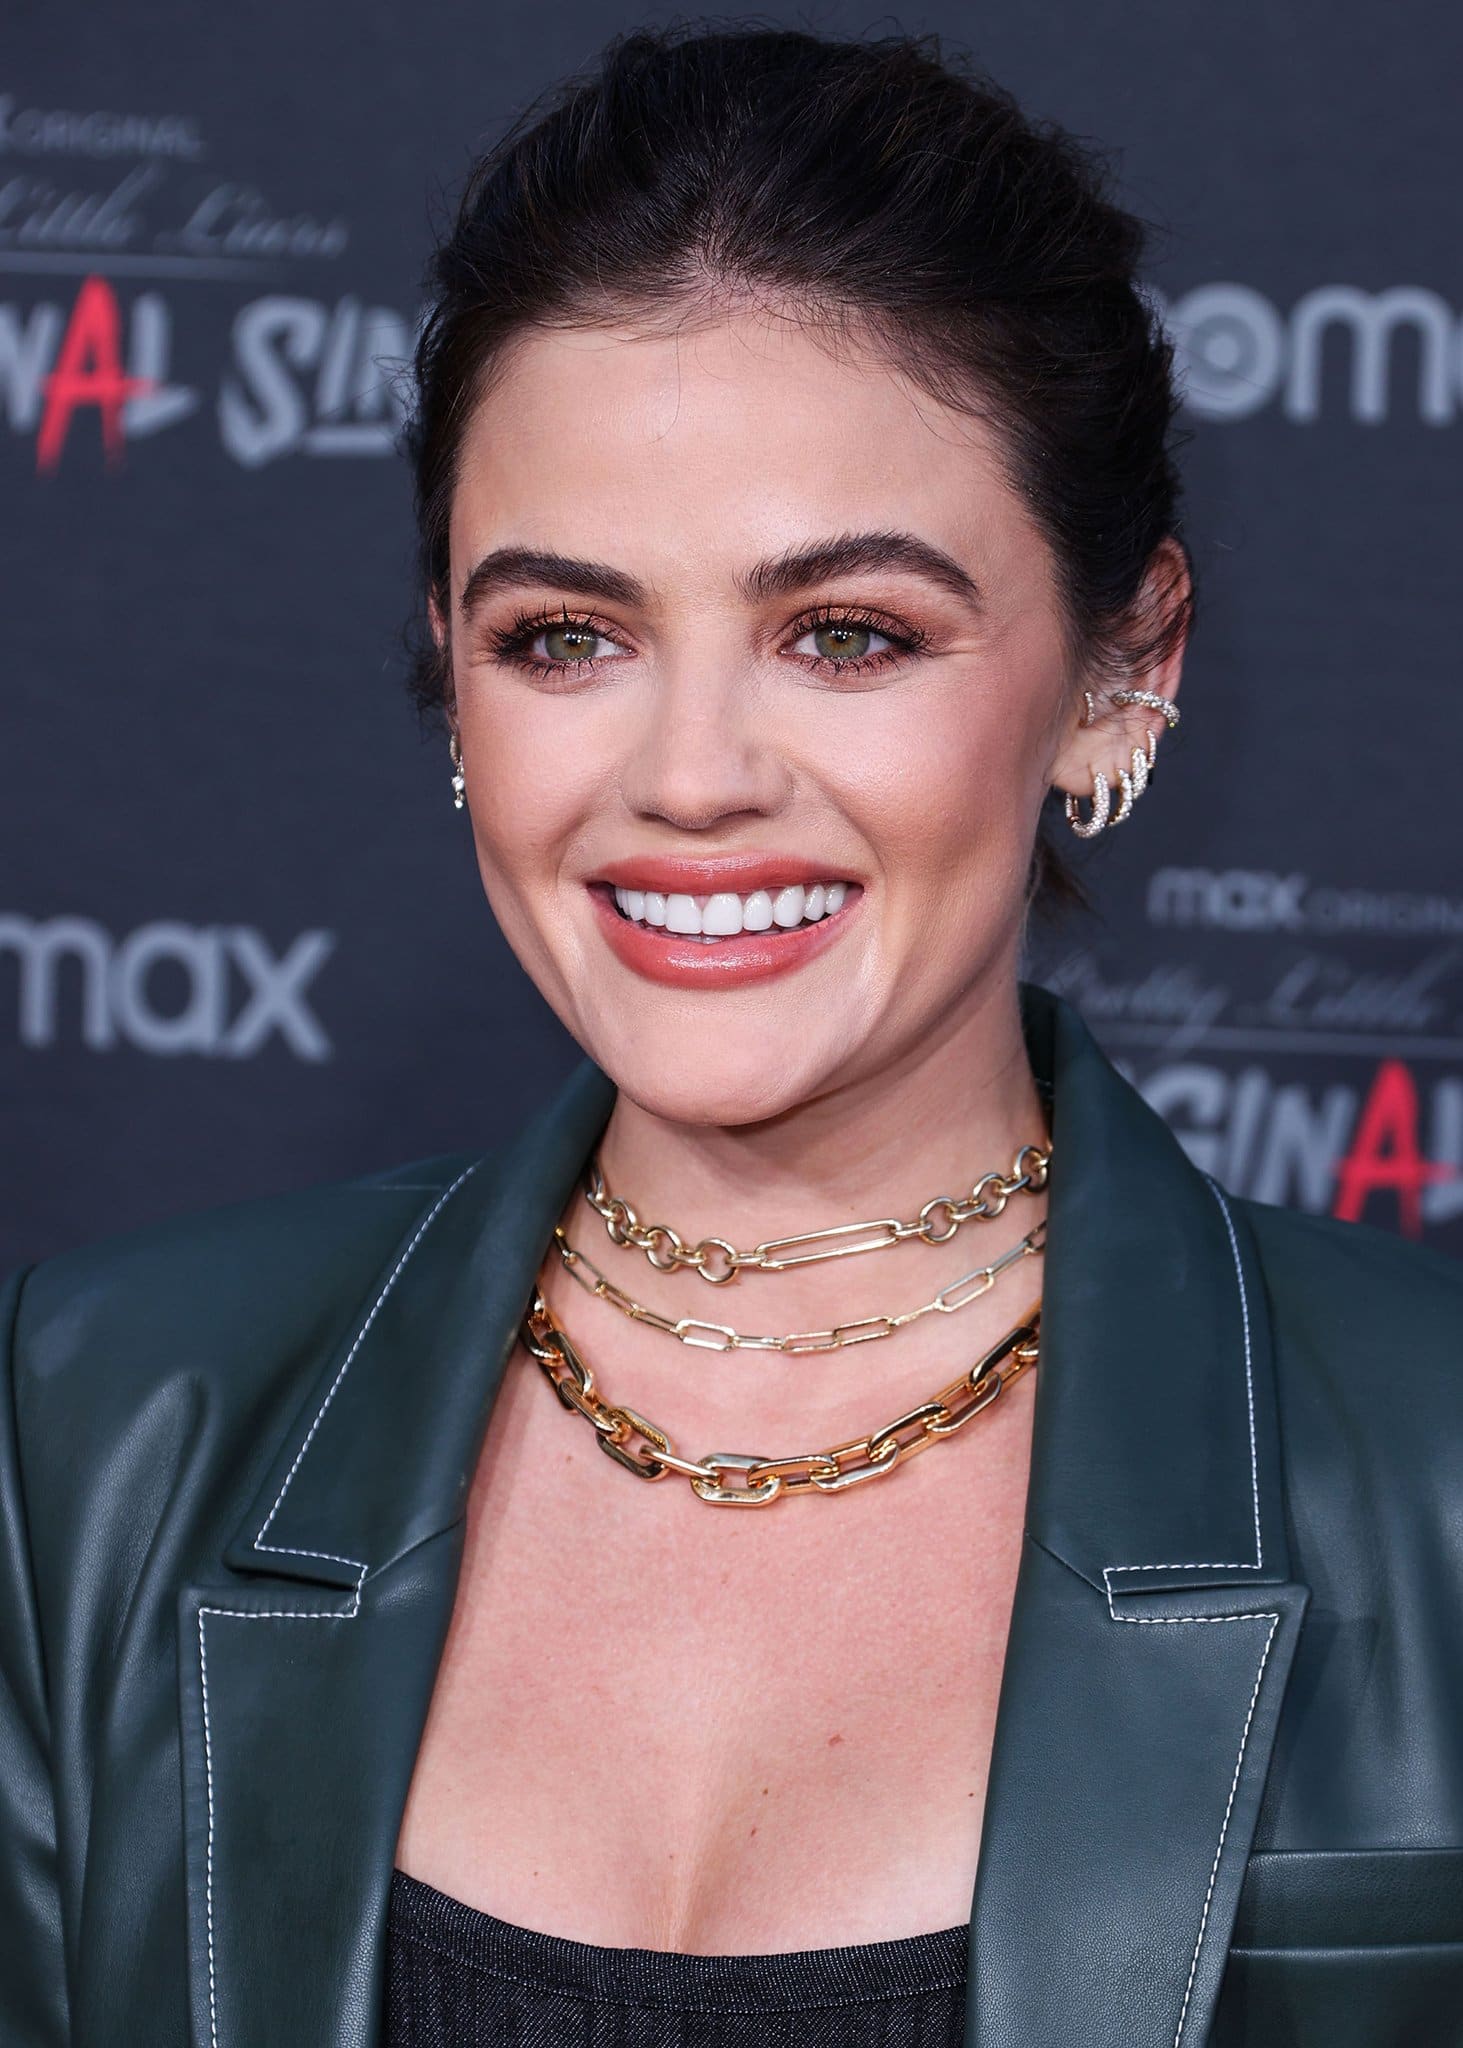 Lucy Hale sweeps her tresses into a messy updo and glams up with rose gold eyeshadow, mascara, and pink lipstick